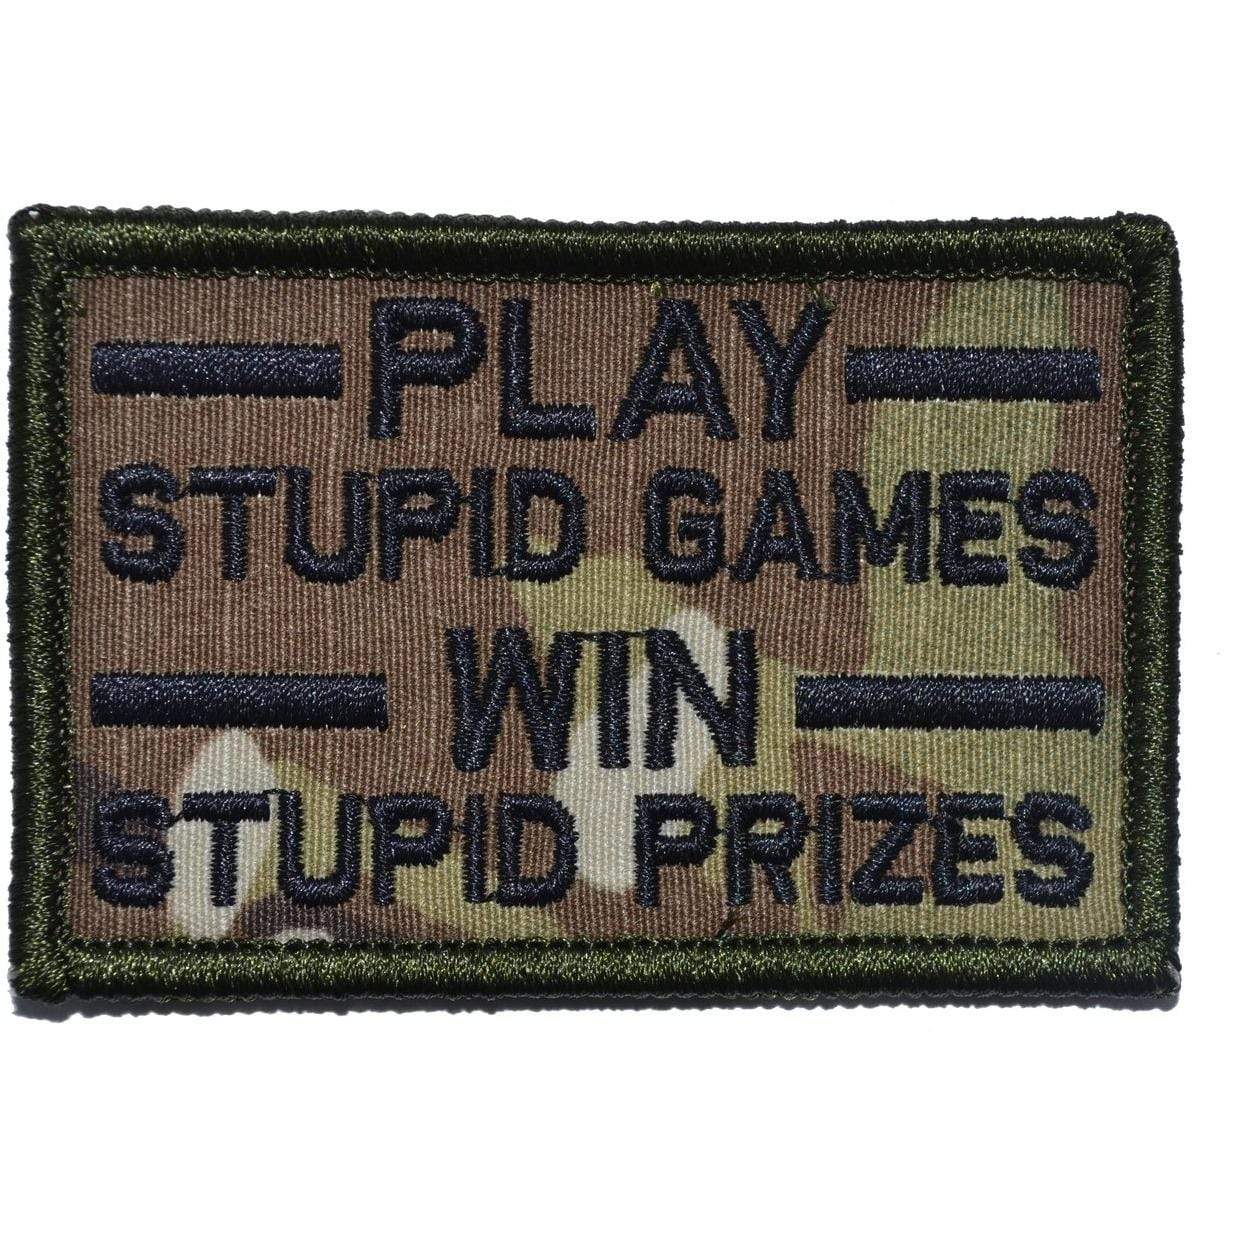 Tactical Gear Junkie Patches MultiCam Play Stupid Games, Win Stupid Prizes - 2x3 Patch